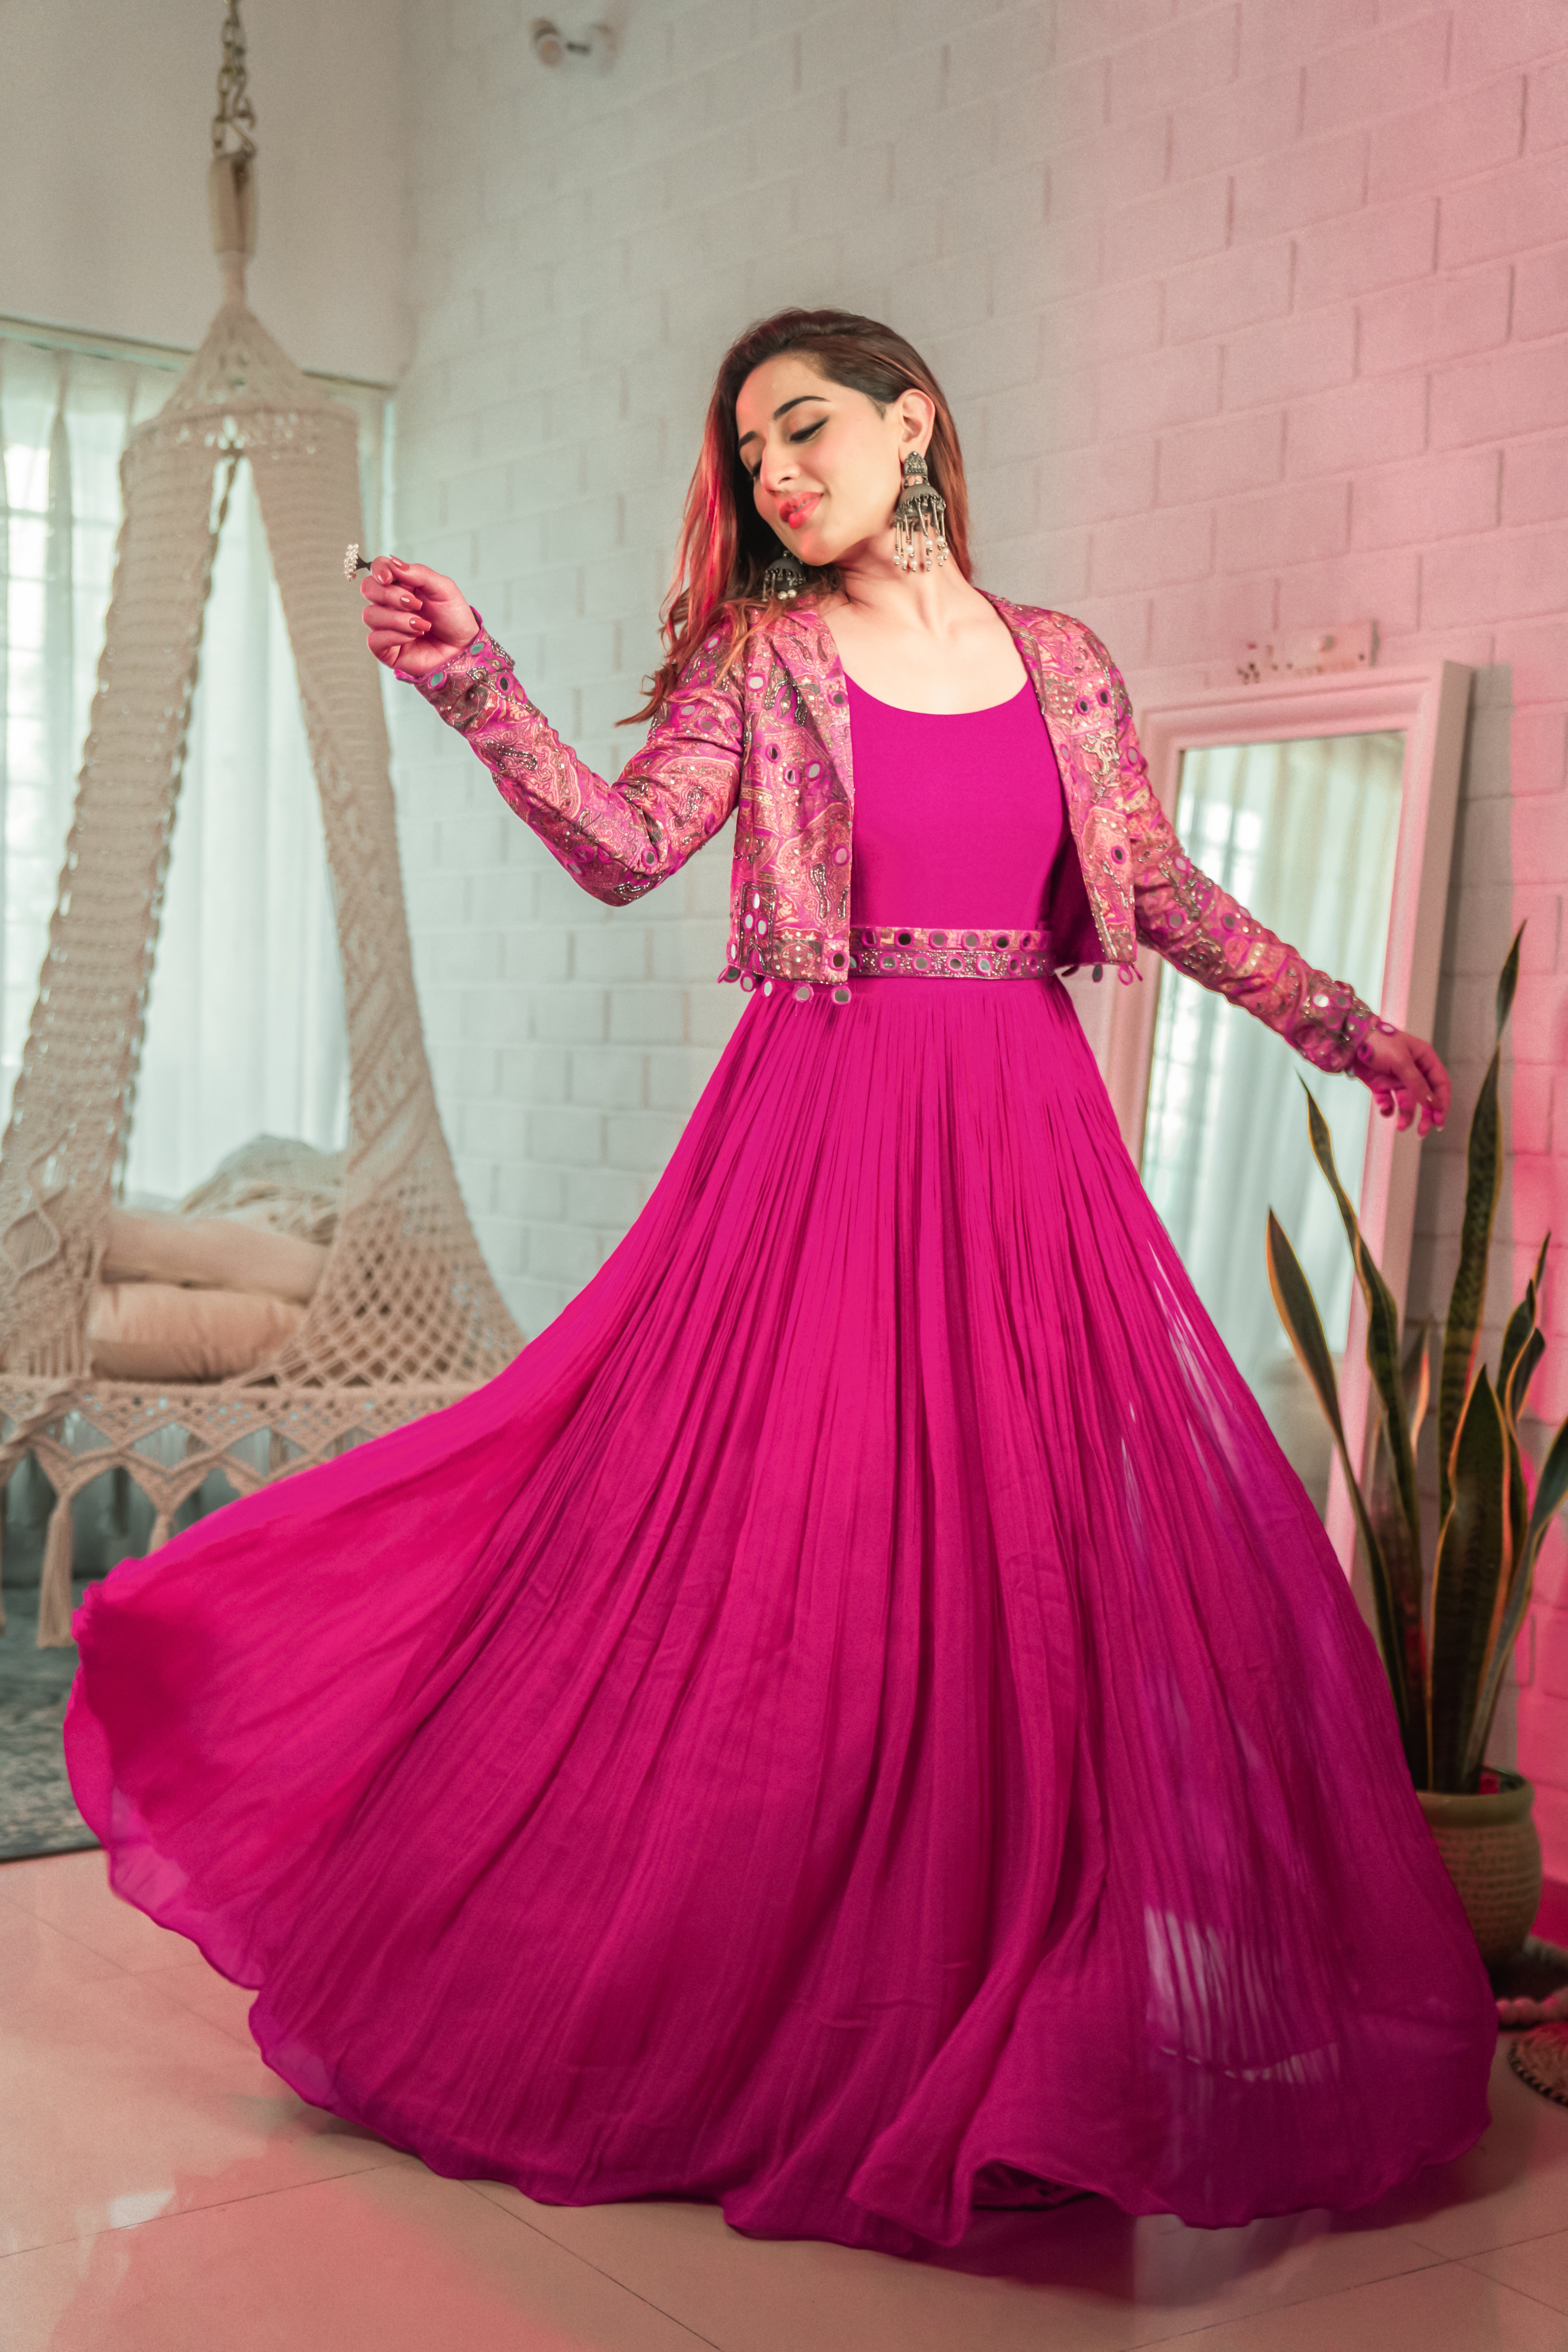 Majestic Magenta Pink Stunning Evening Gown